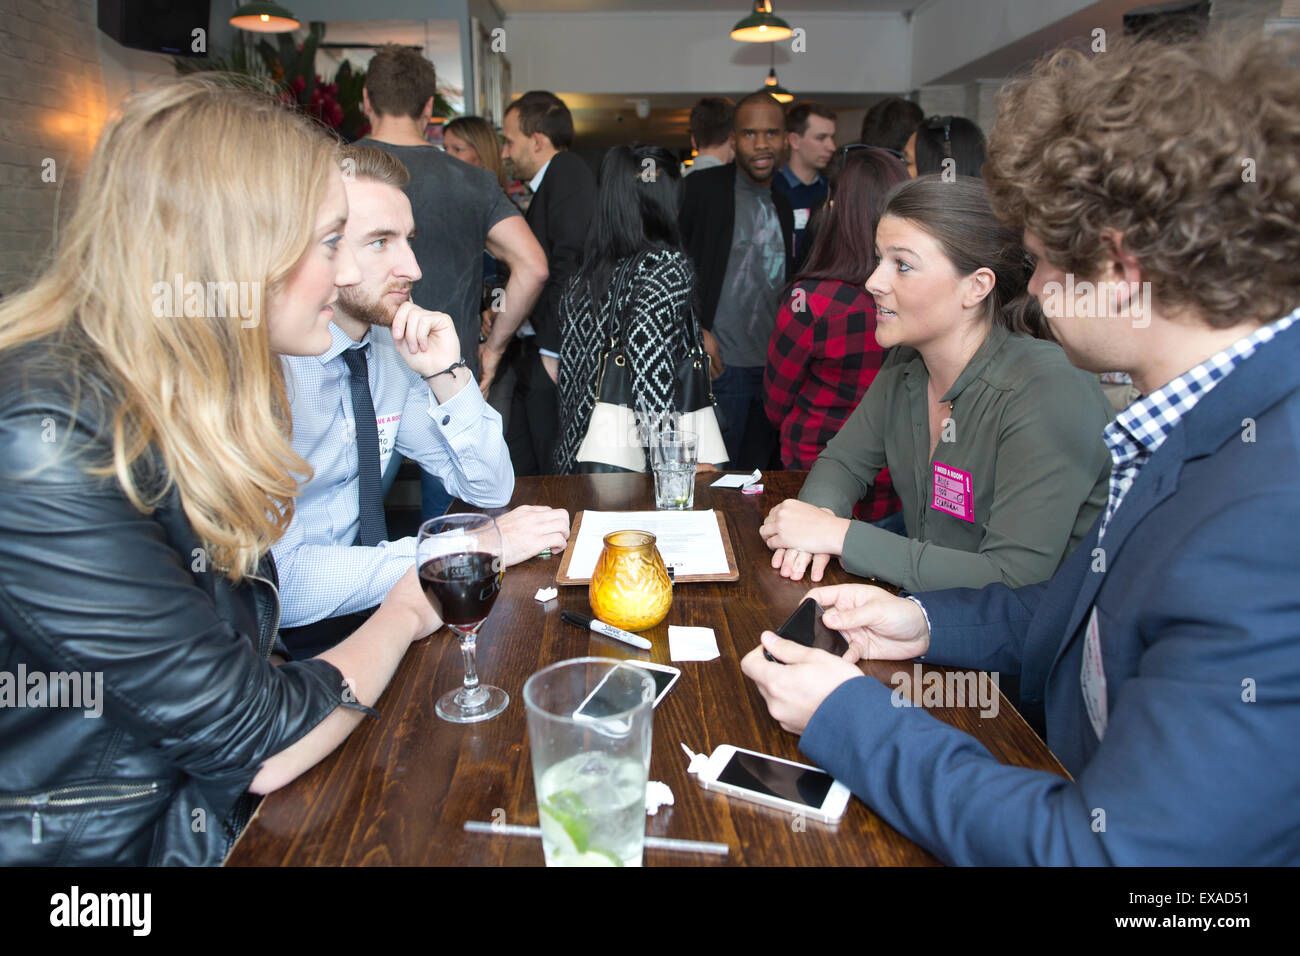 Speed dating Is back and it's time to say goodbye to swiping left and right on dating apps and dating events